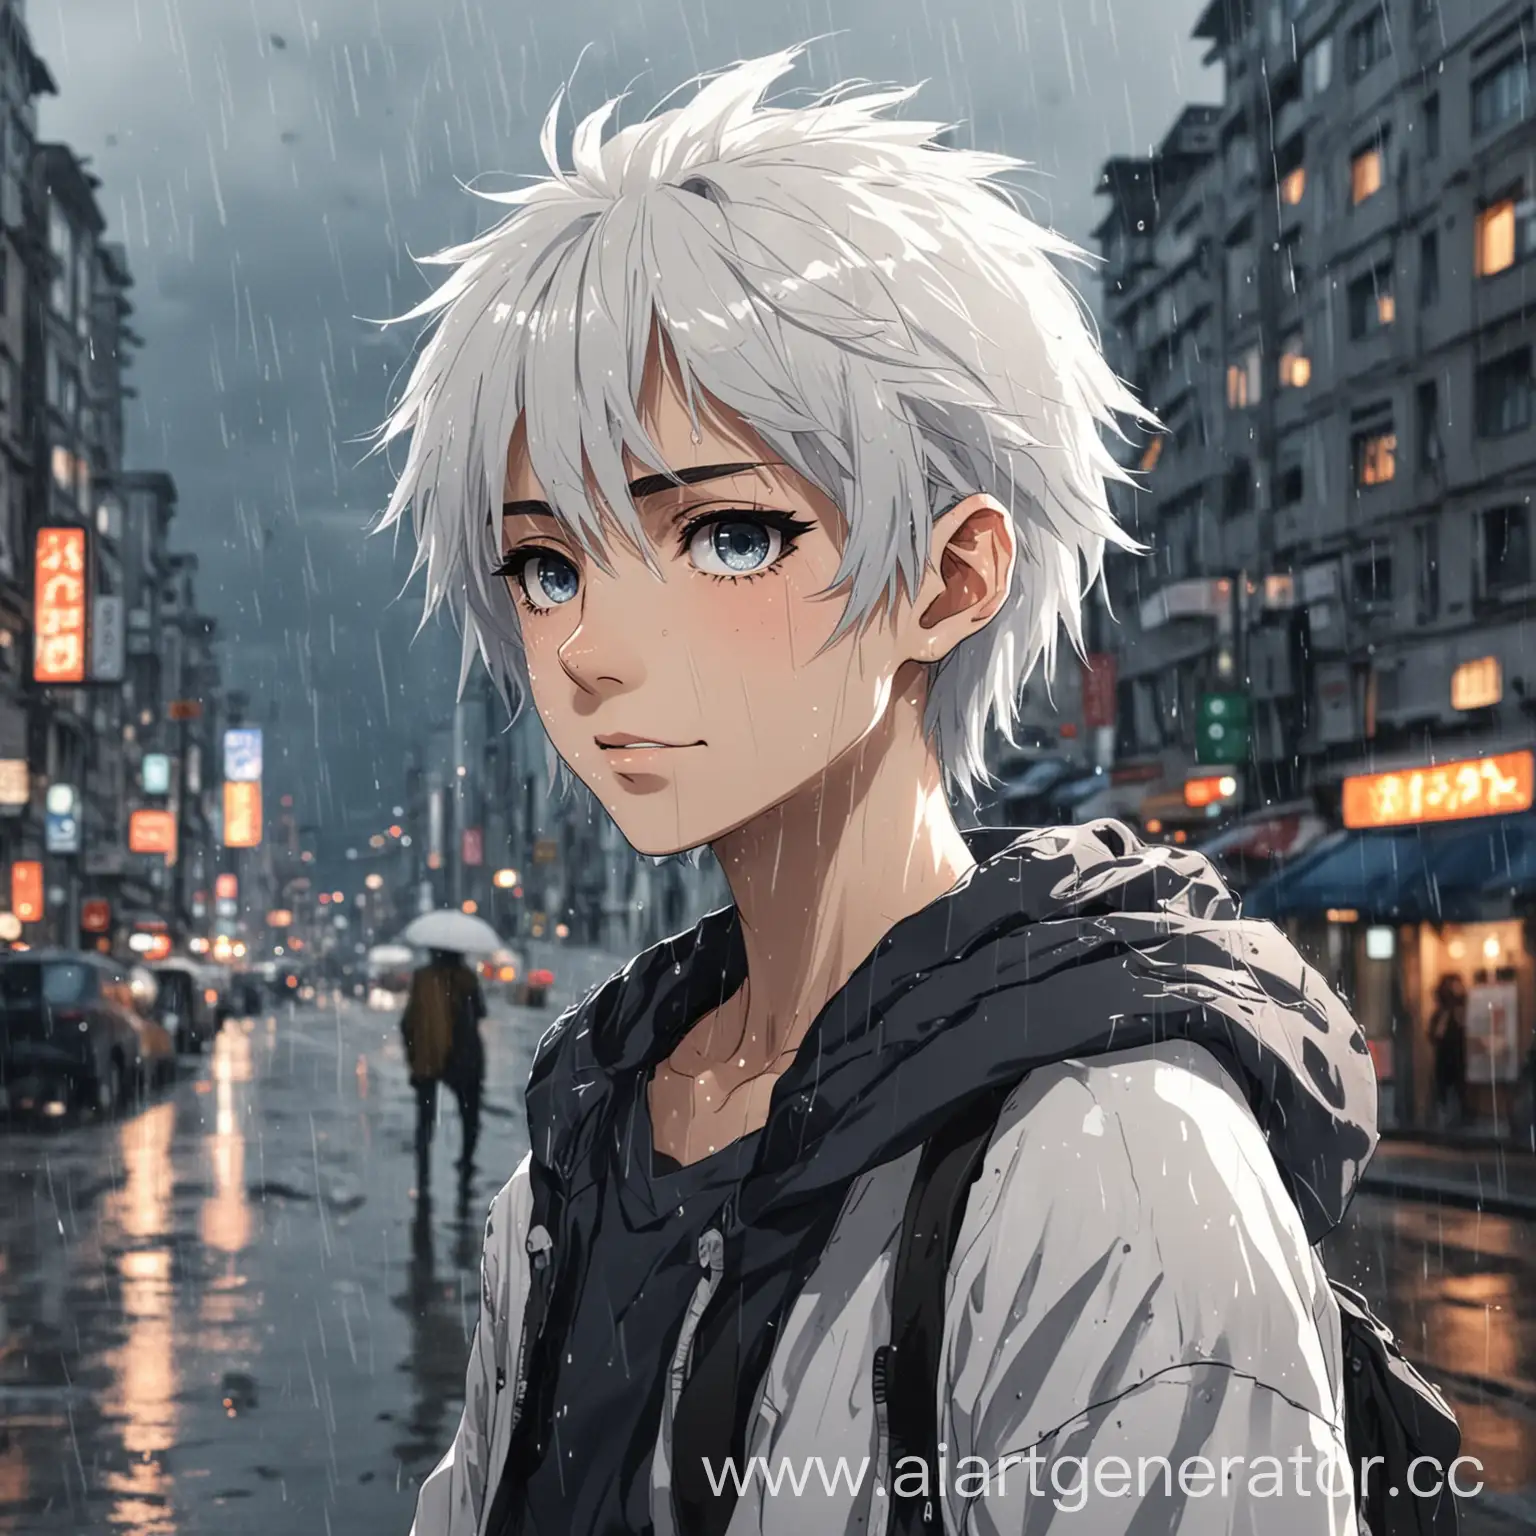 Teenager-with-White-Hair-in-Rainy-Urban-Setting